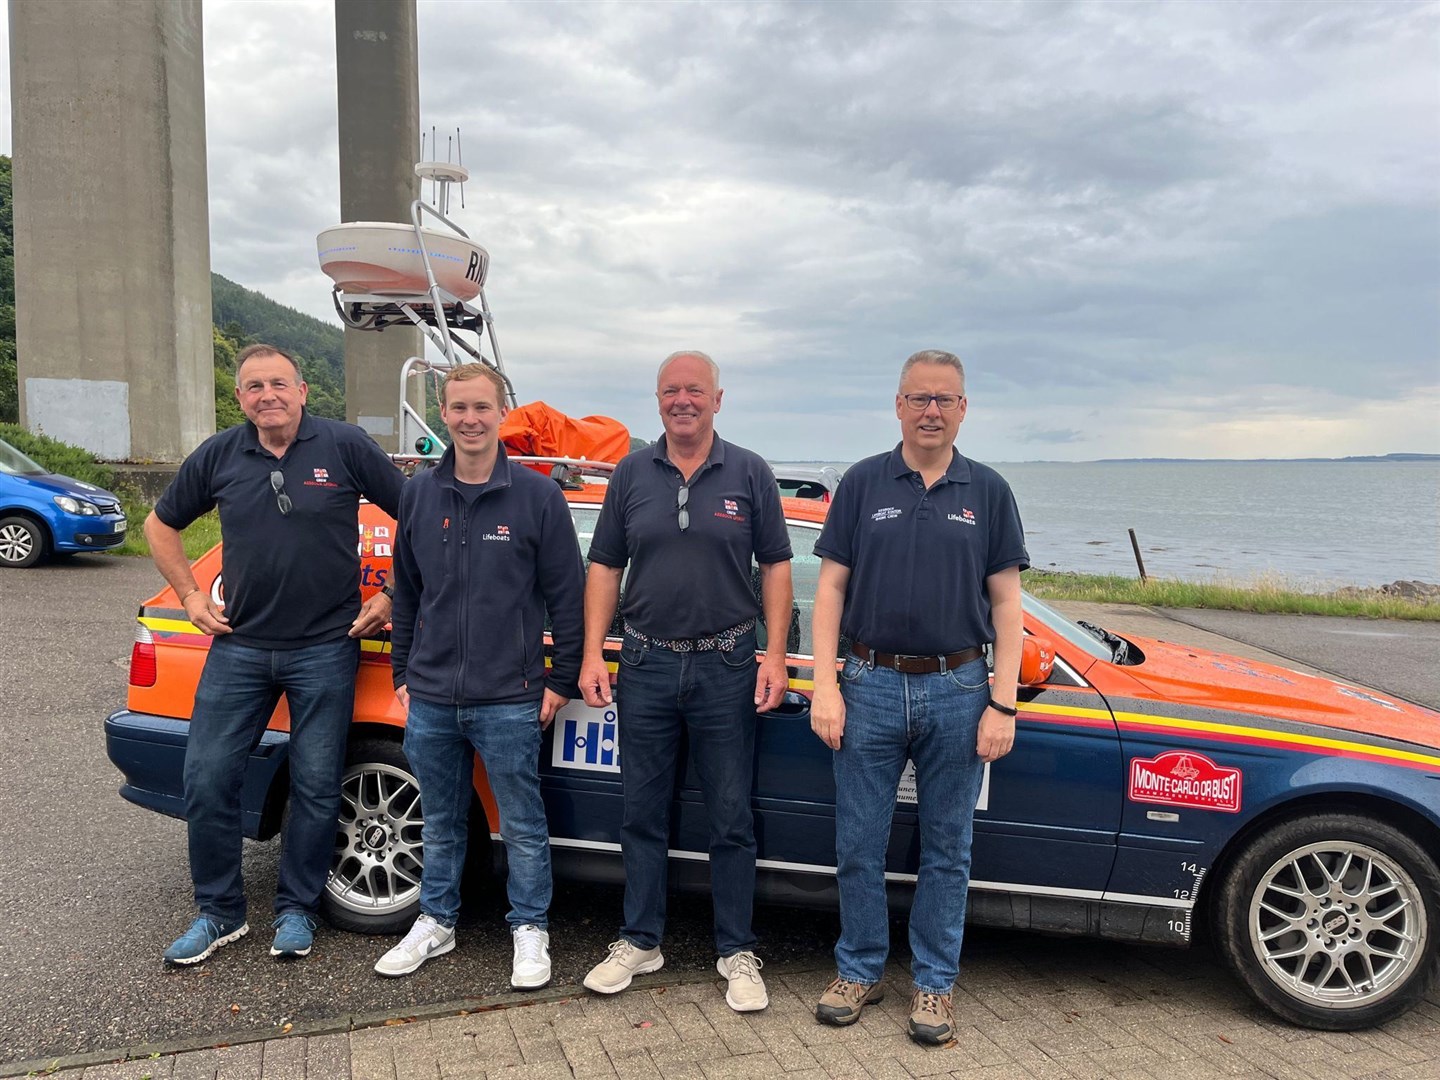 The four-man team from RNLI Kessock sets off on the epic journey.